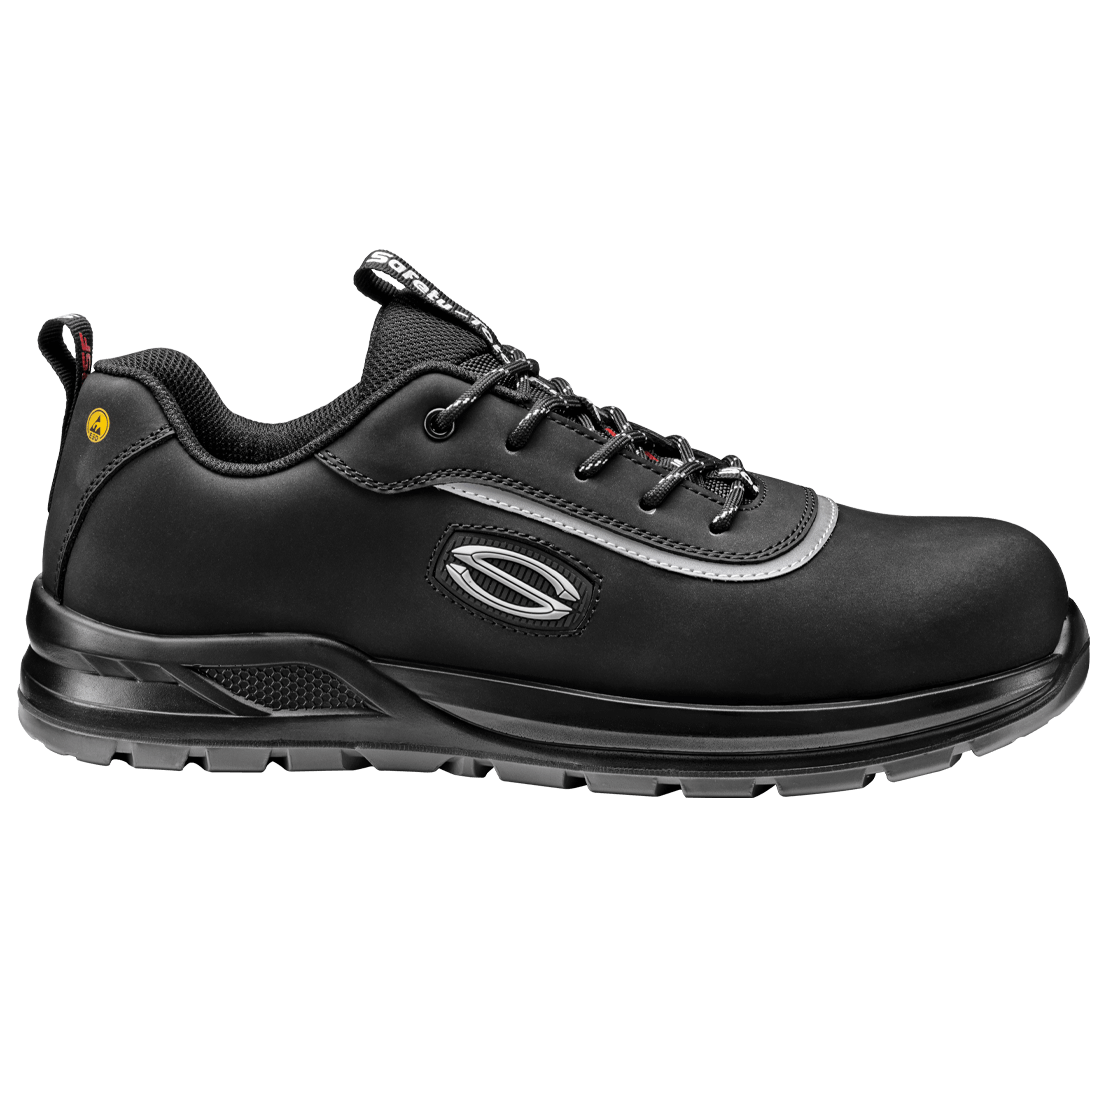 NEW OVERCAP BSF REX SHOE | Sir Safety System